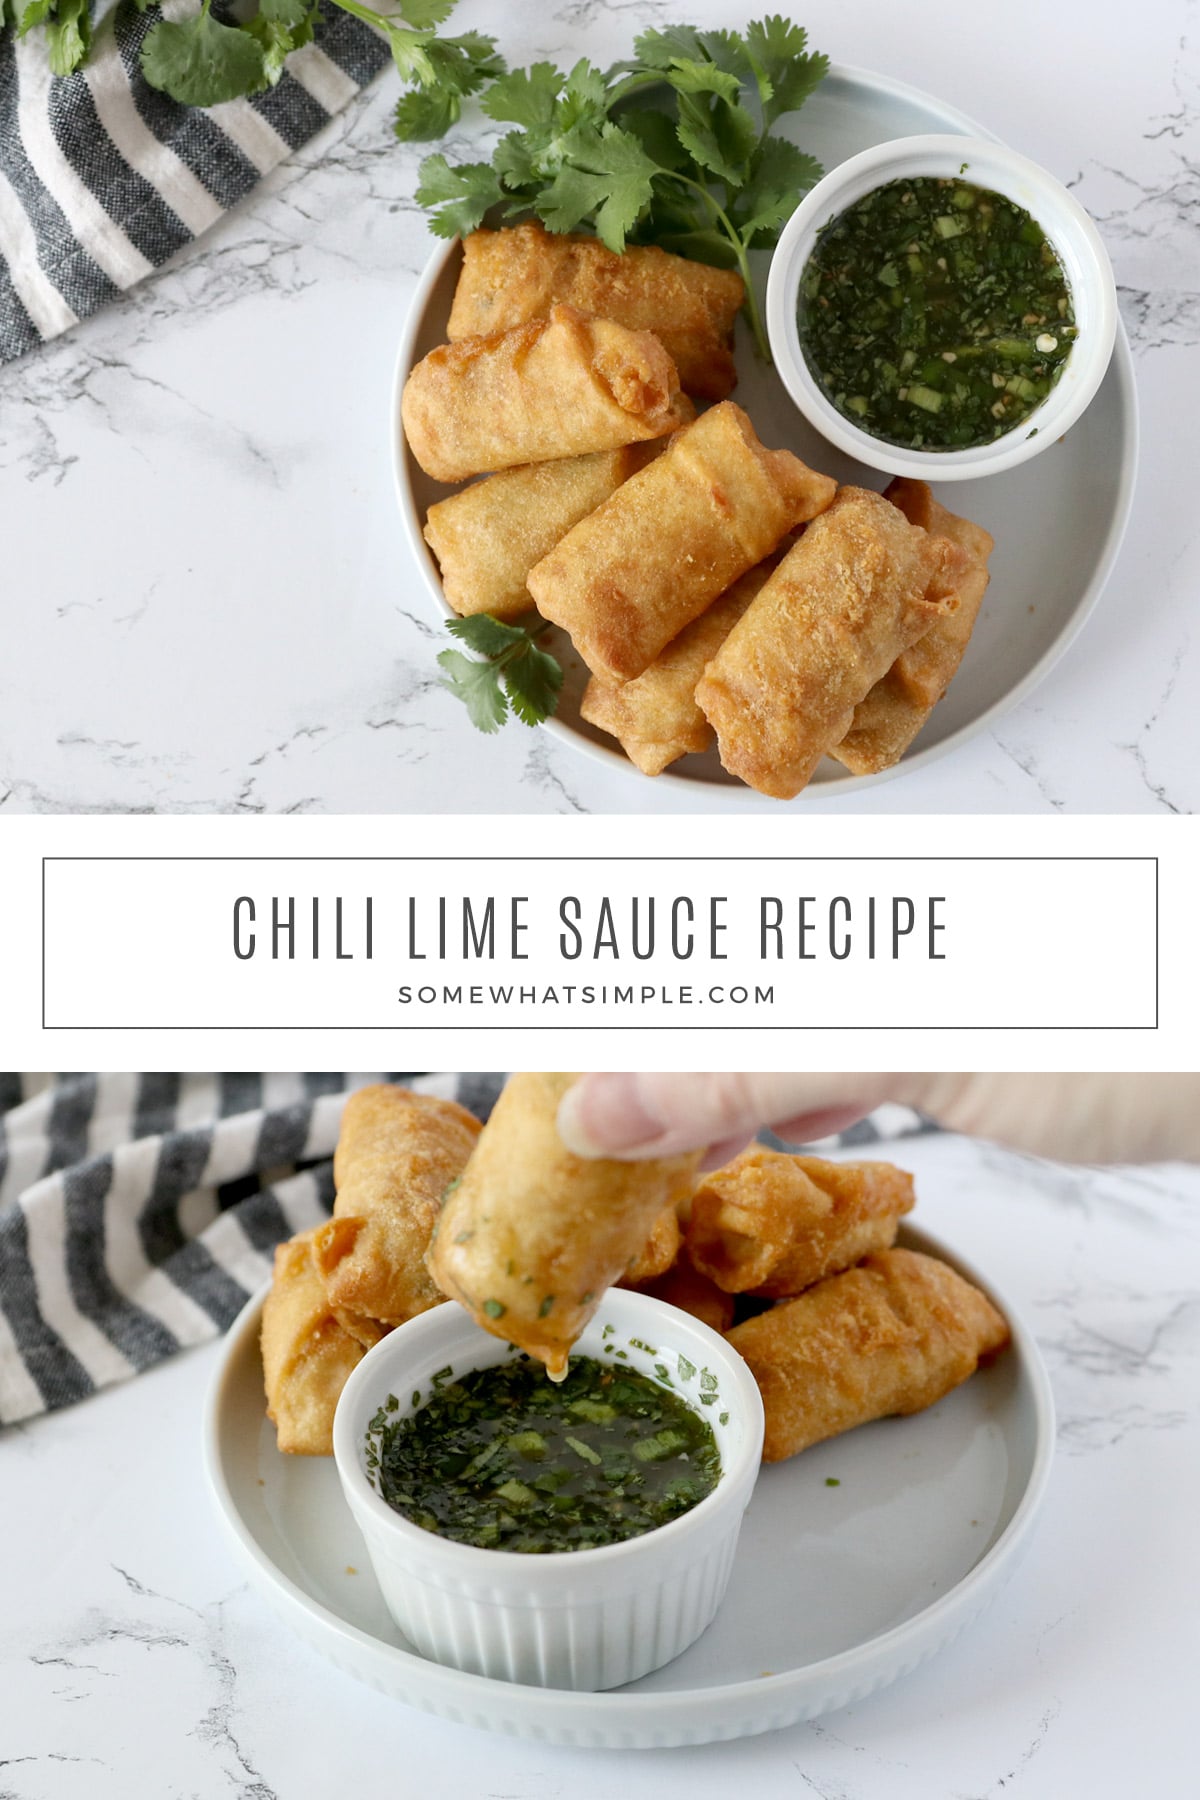 Chili Lime Sauce is spicy, sweet, and totally easy to make. It’s delicious drizzled over chicken, fish, and other meats, or served as a dip for your favorite Asian-inspired finger foods. via @somewhatsimple